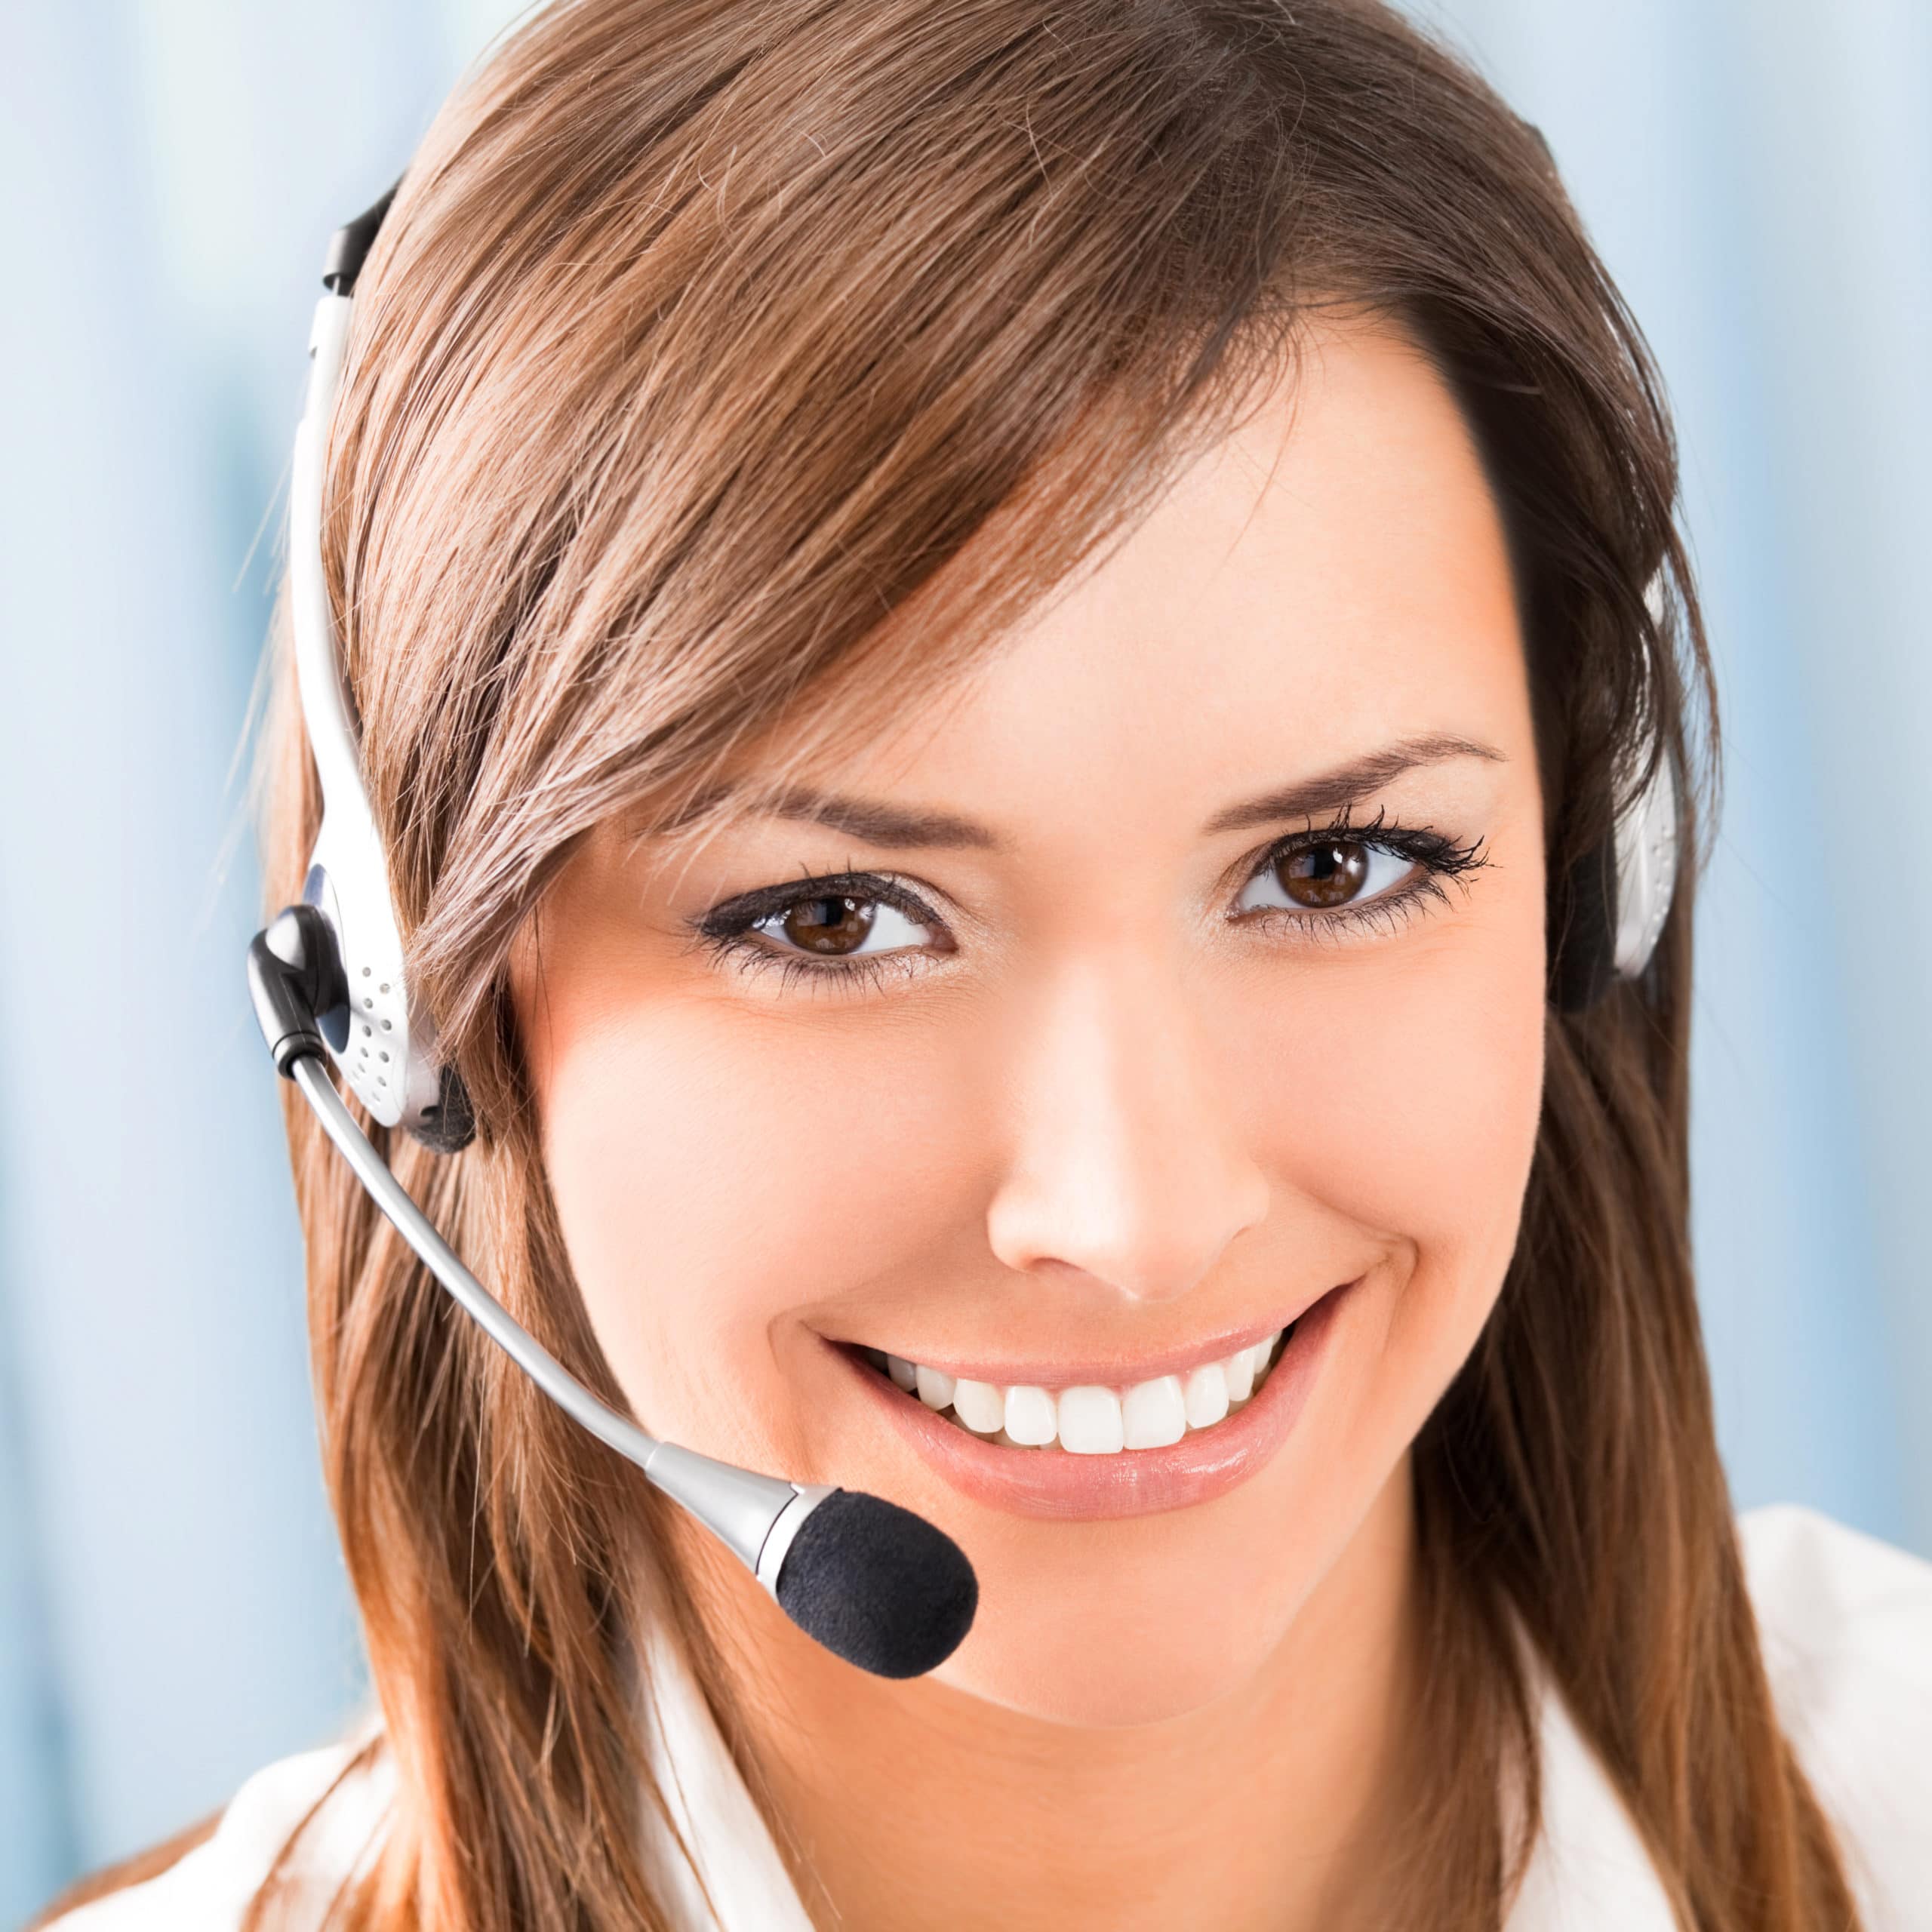 Telehealth Answering Services